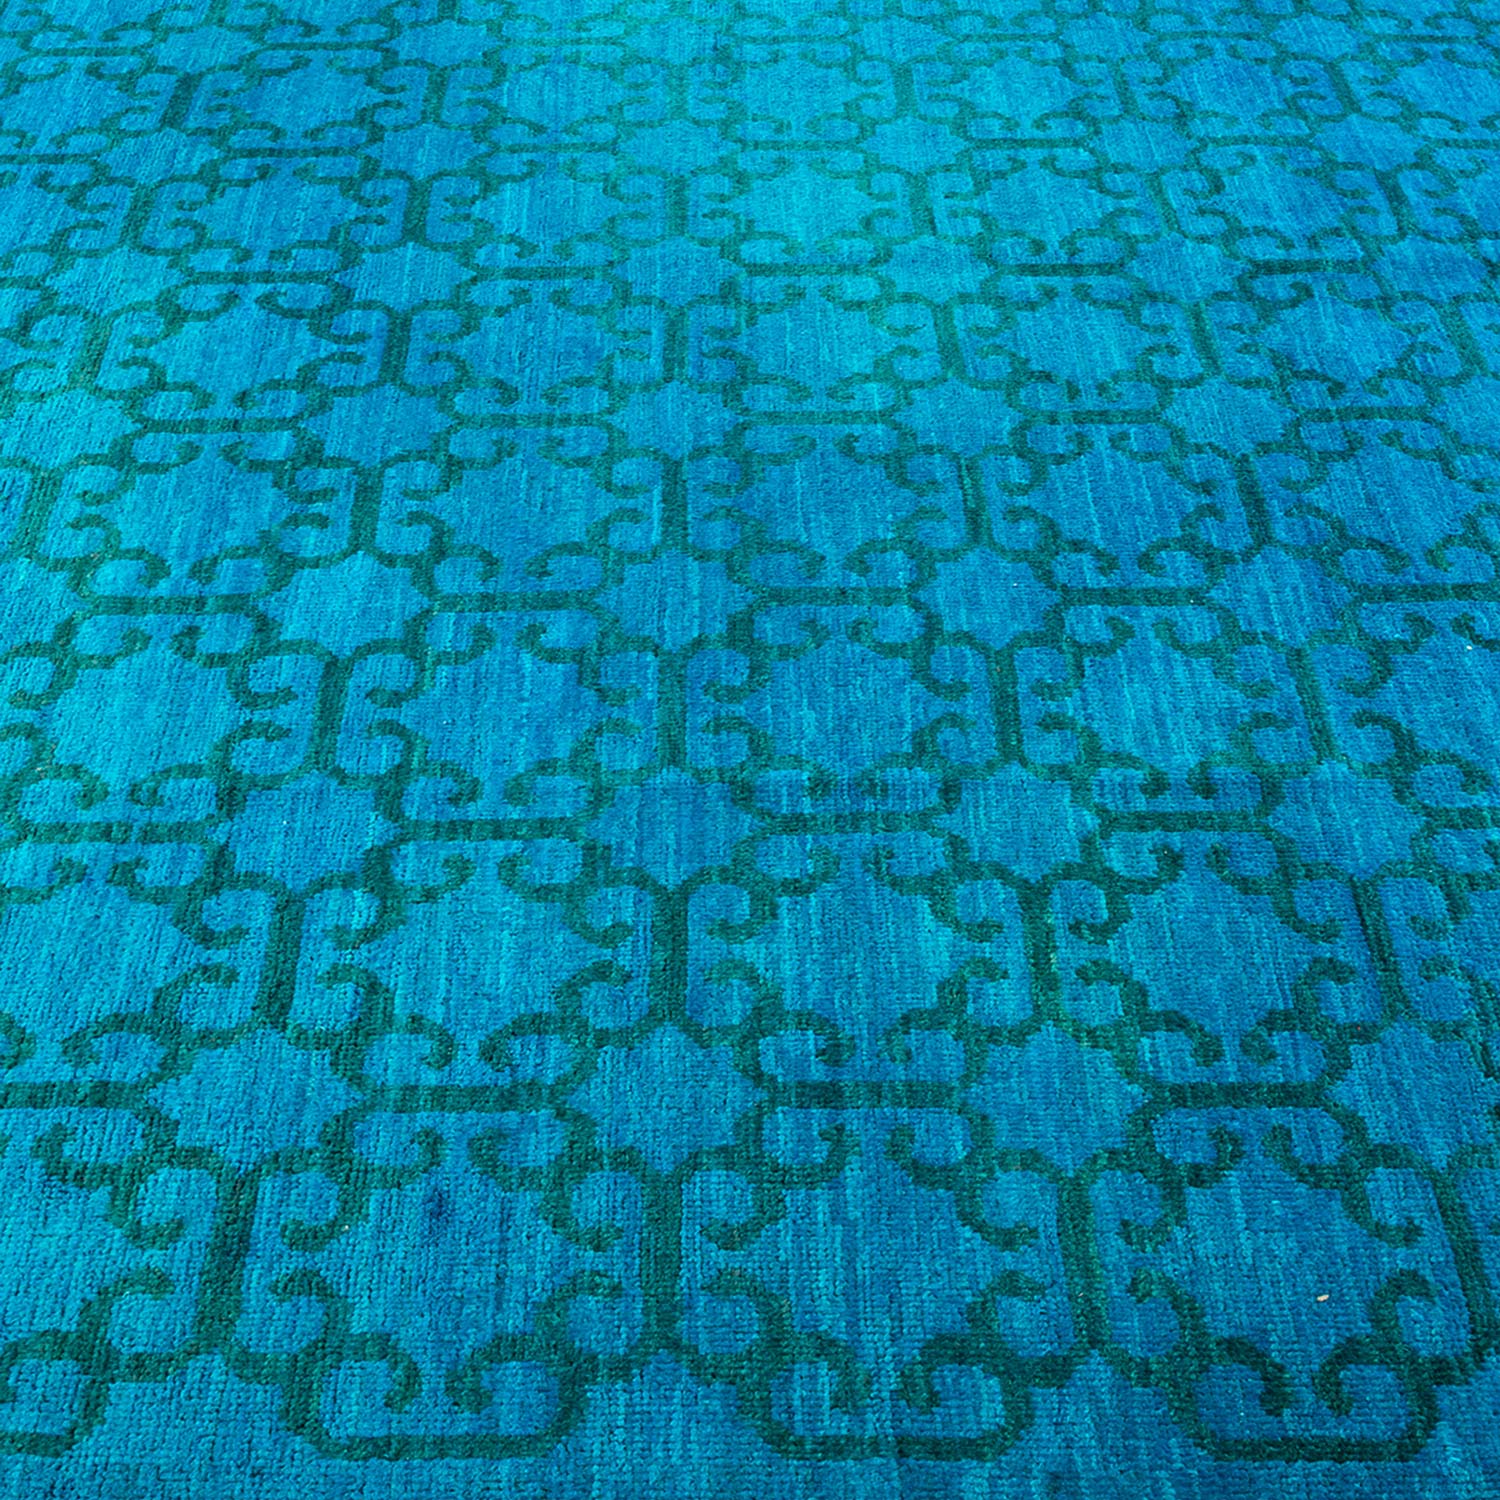 Close-up of a vibrant blue carpet with an intricate design.